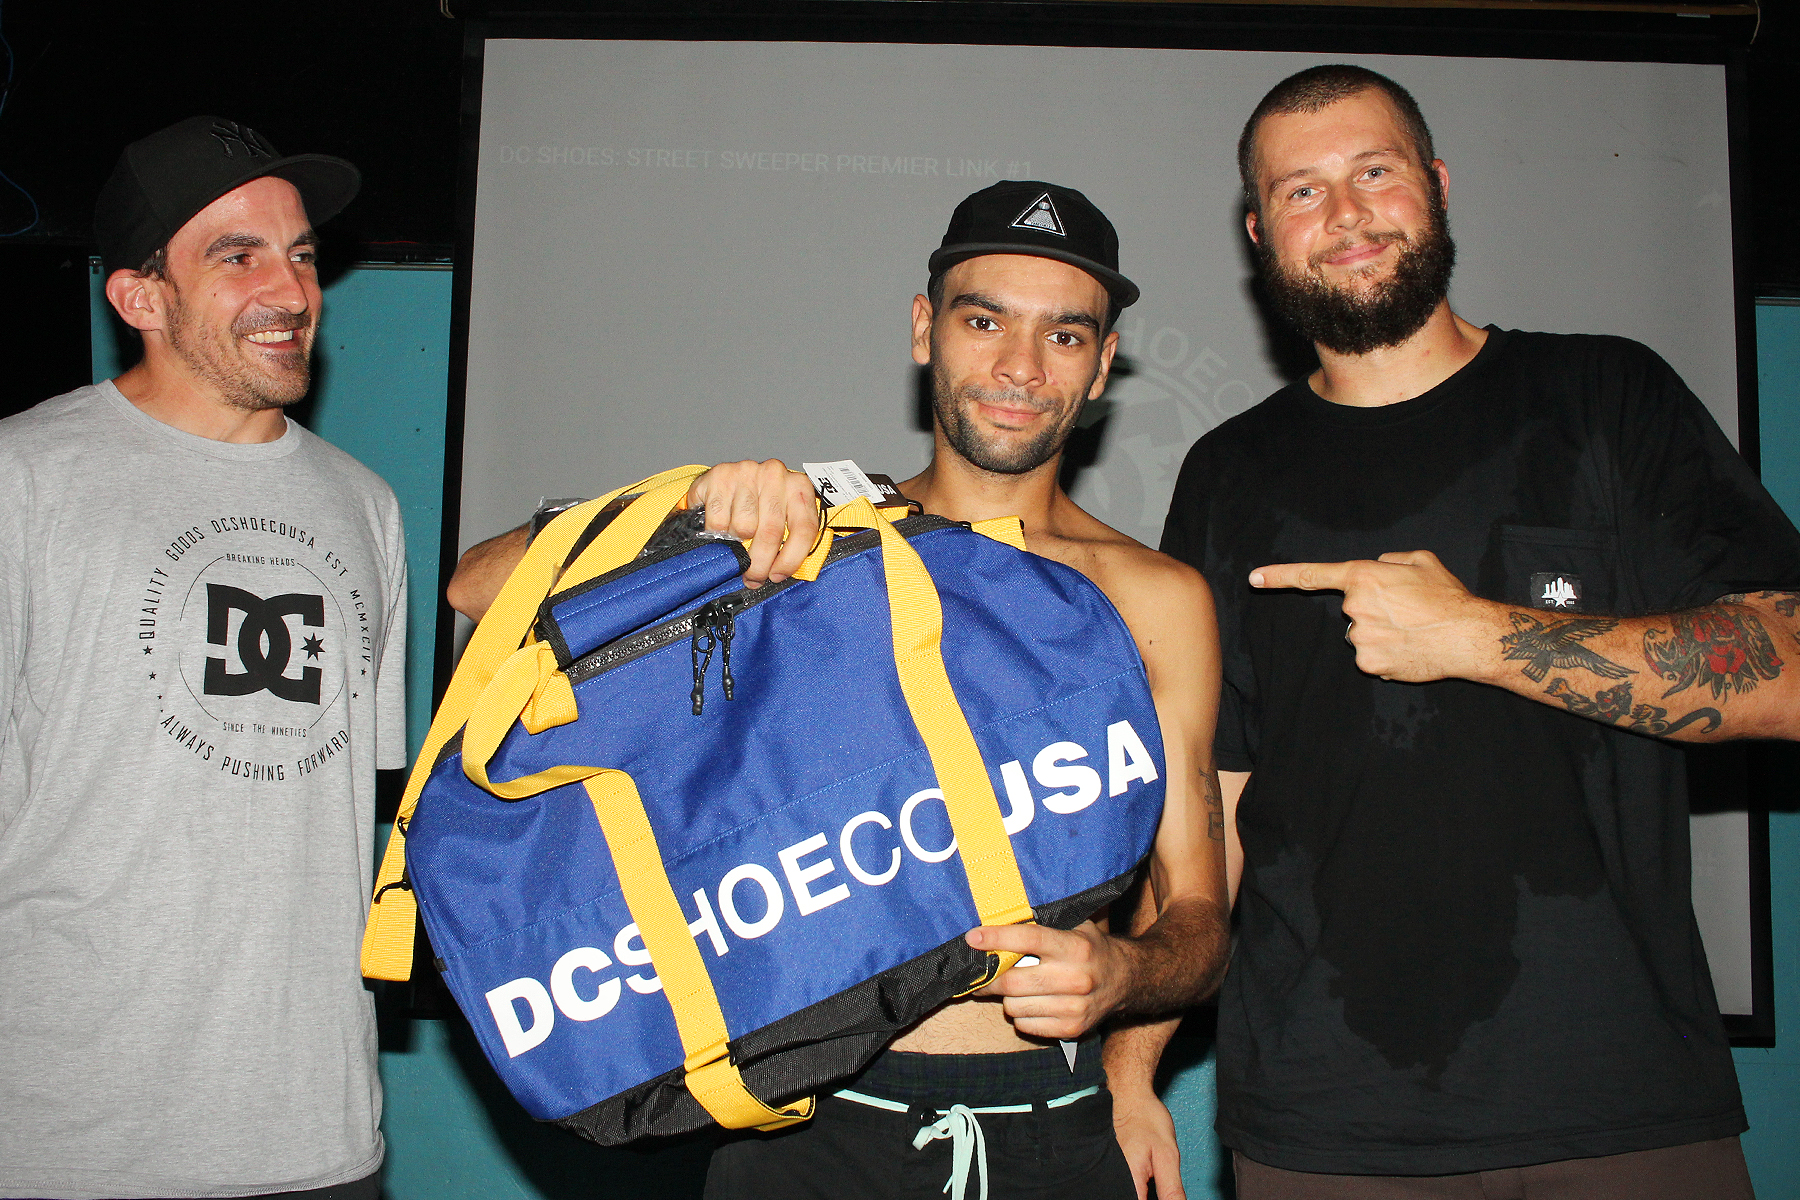 DC Street Sweeper Video Premiere Photos